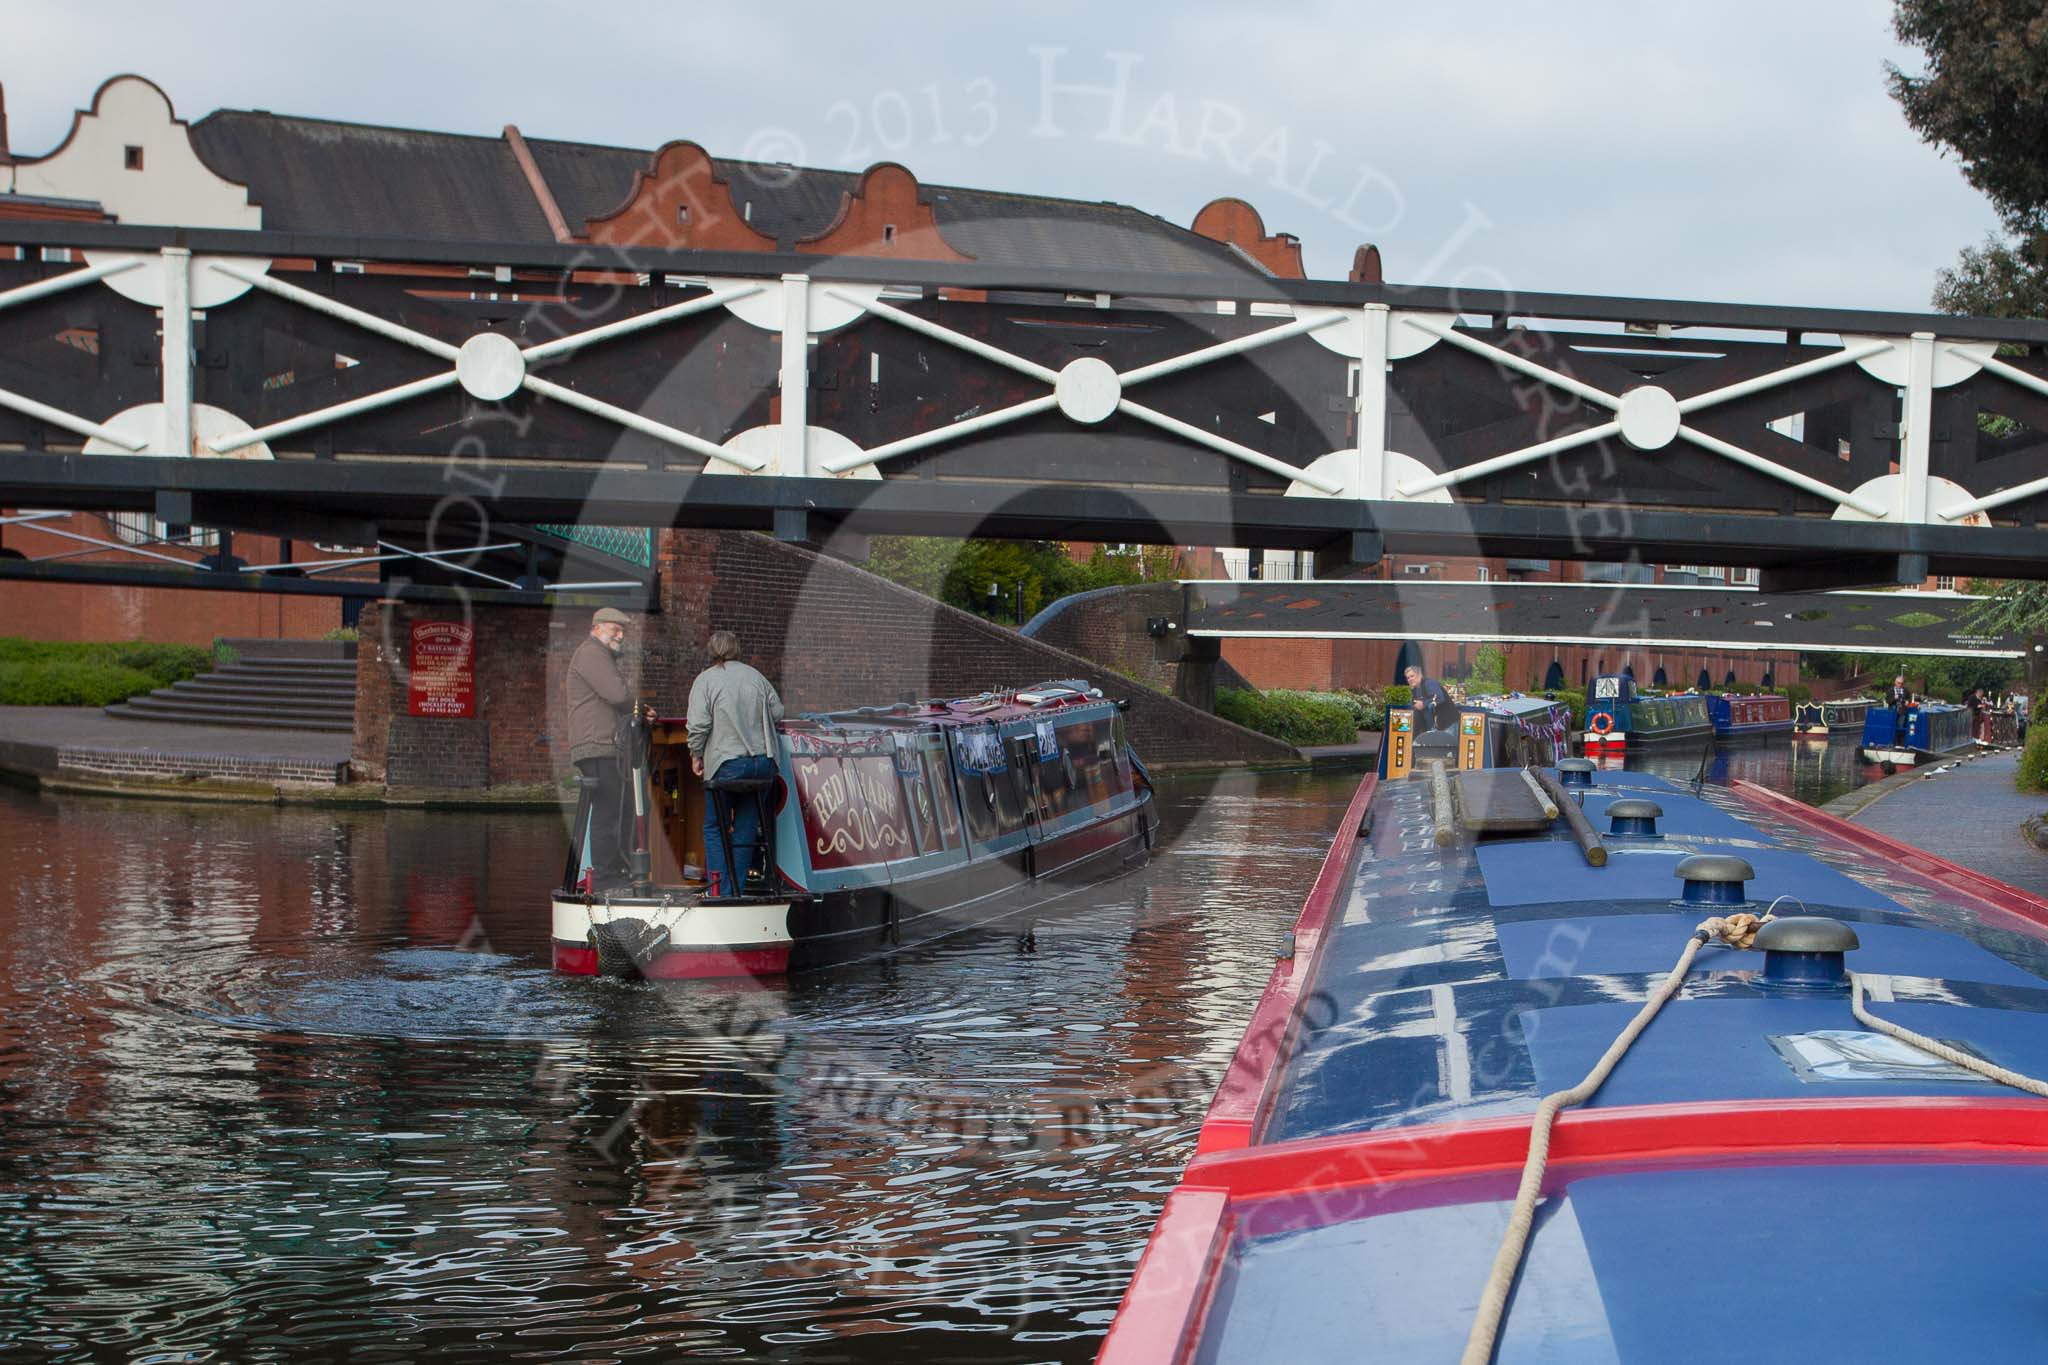 BCN Marathon Challenge 2013: The start of the BCN Marathon Challenge - NB "Firefly, NB "Red Wharf", and NB "Felonious Mongoose" at Old Turn Junction in the centre of Birmingham..
Birmingham Canal Navigation,


United Kingdom,
on 25 May 2013 at 08:00, image #31